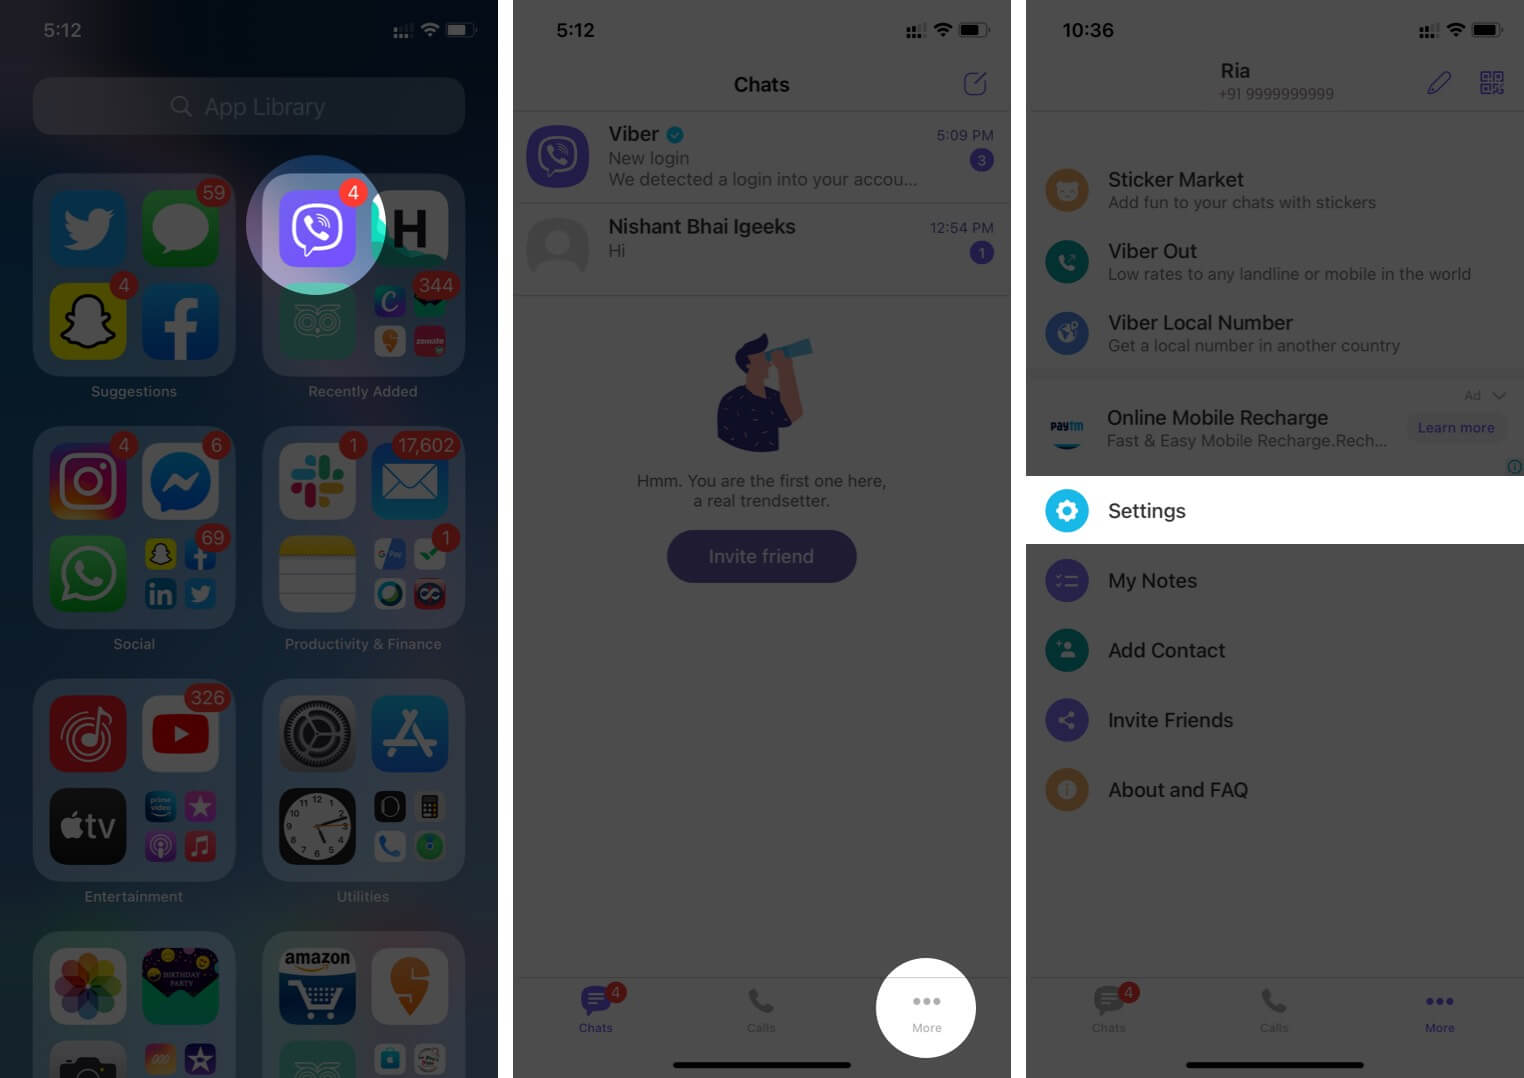 Open Viber app Tap on More and Then Tap on Settings on iPhone